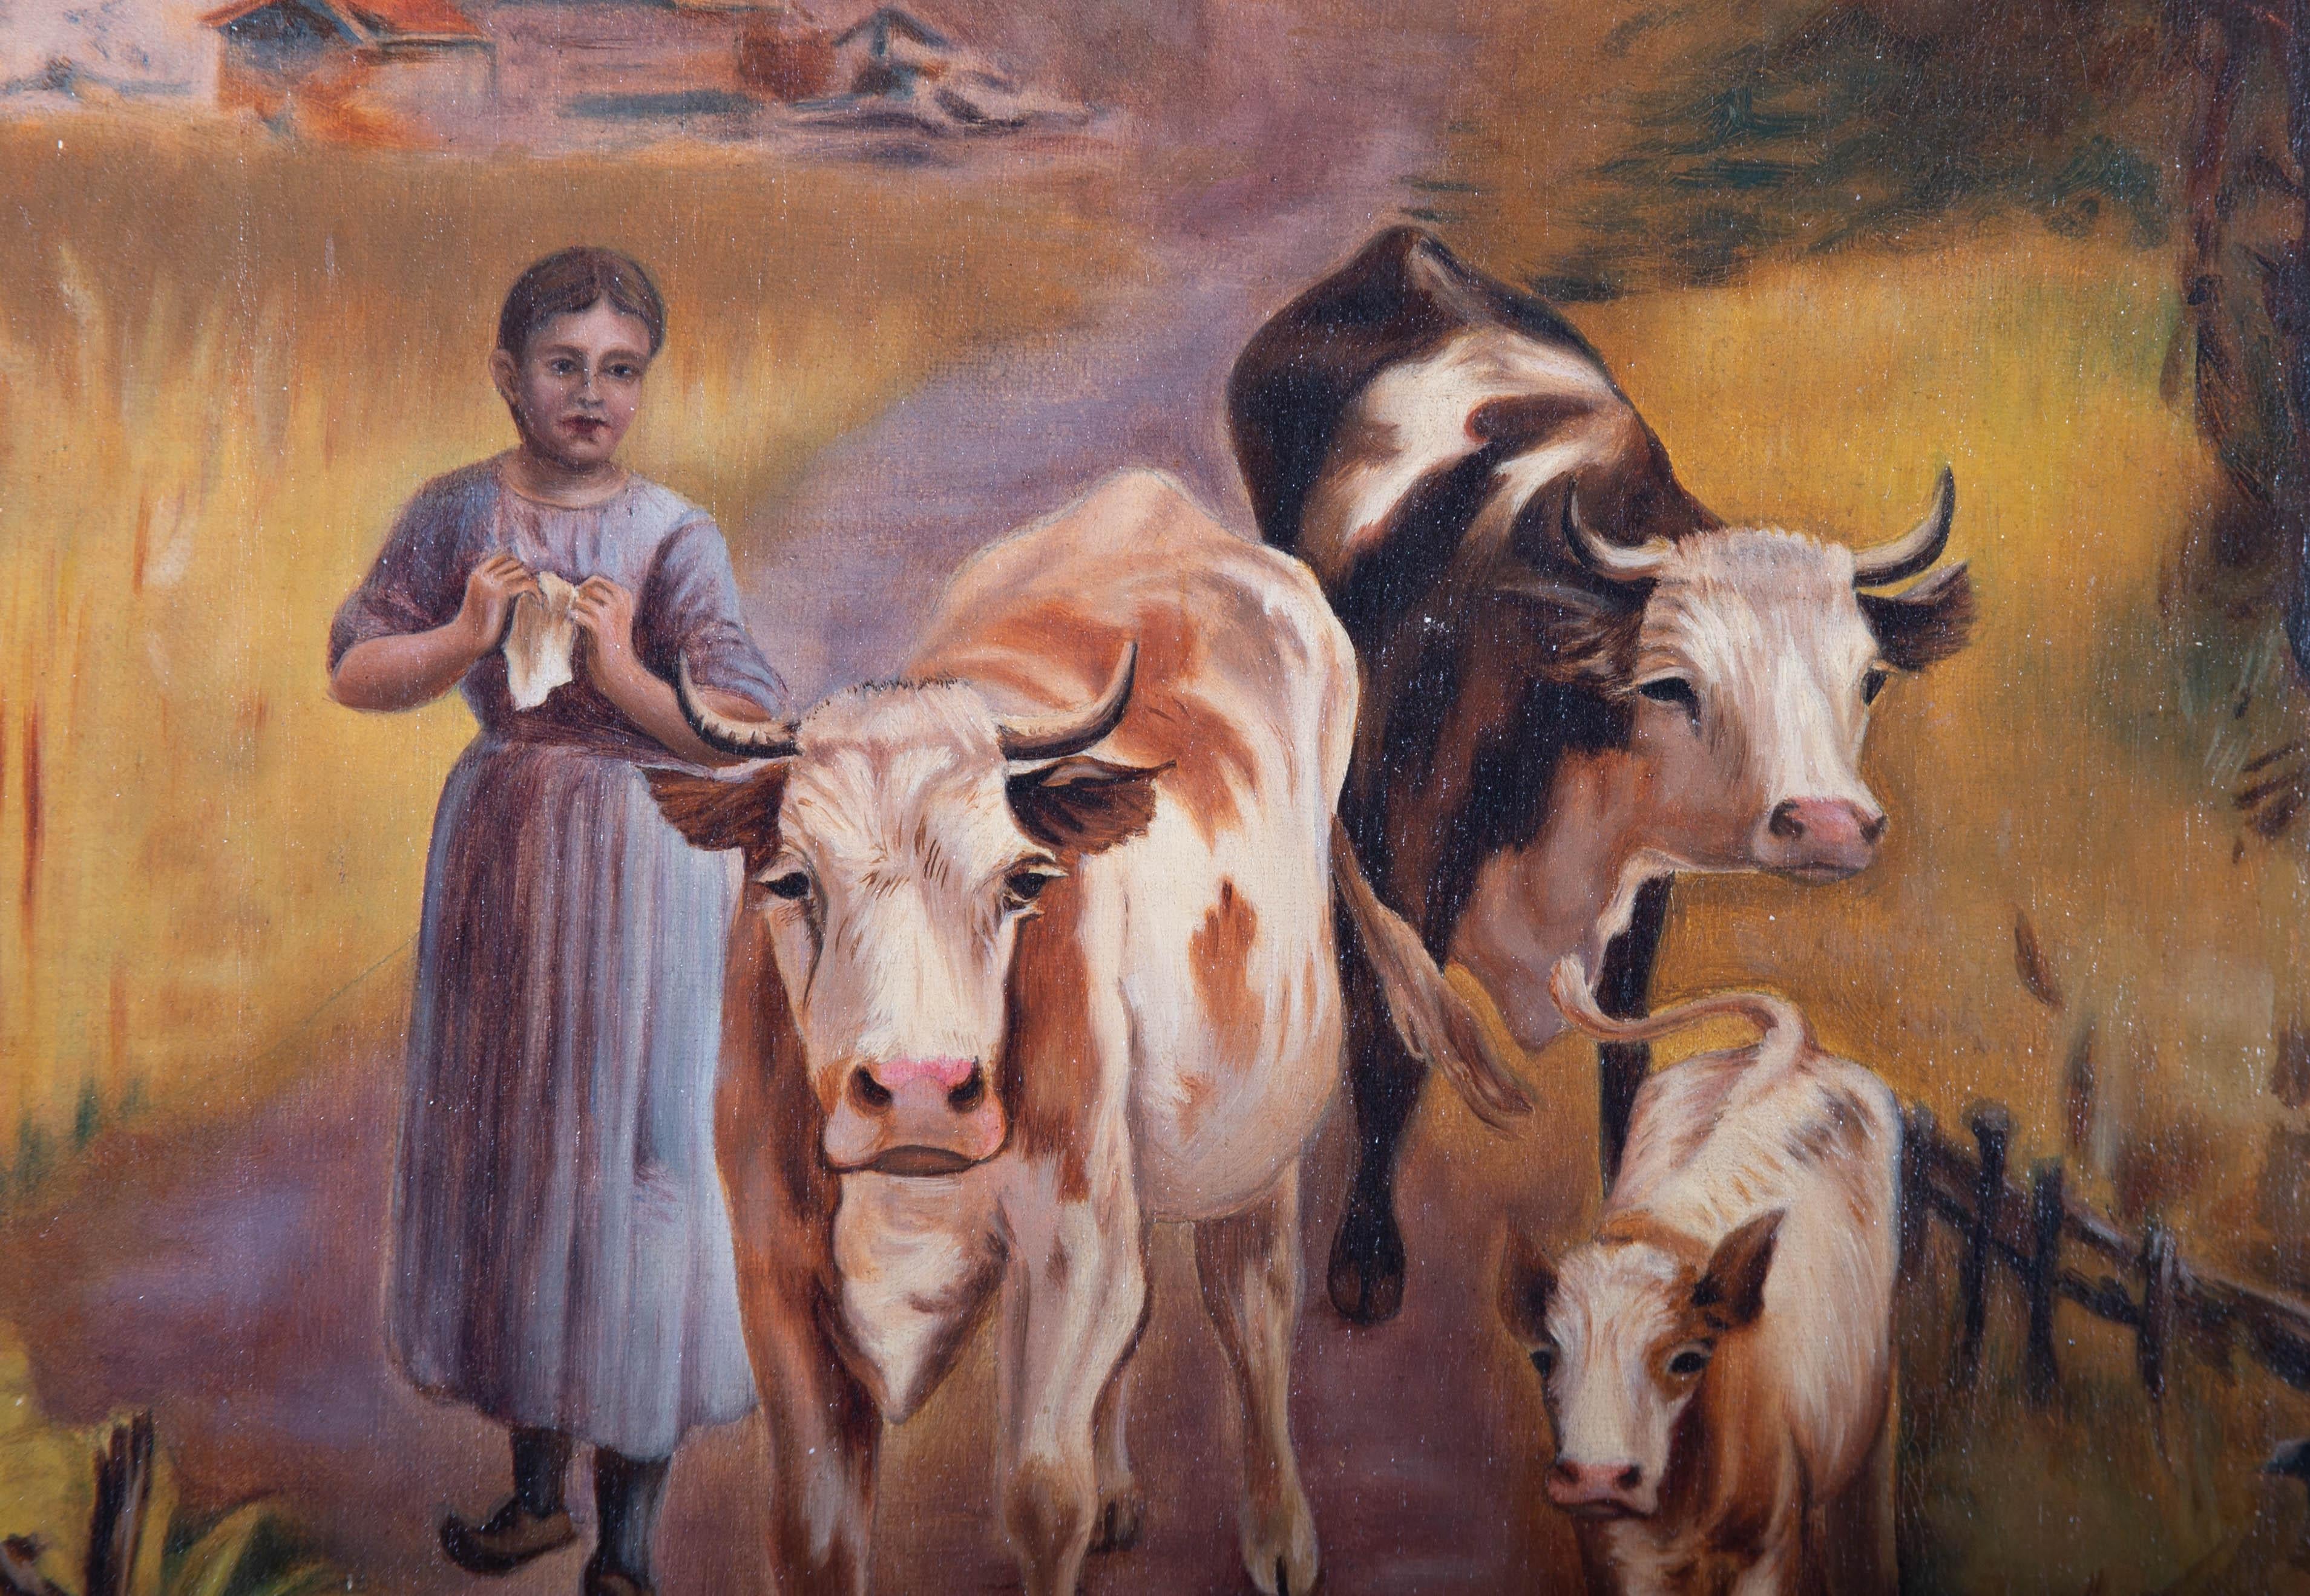 This delightful continental scene depicts a young girl leading a cattle herd down a dirt path. A small town can be seen in the distance. Unsigned. Presented in an ornate gilt frame. On canvas on stretchers.
